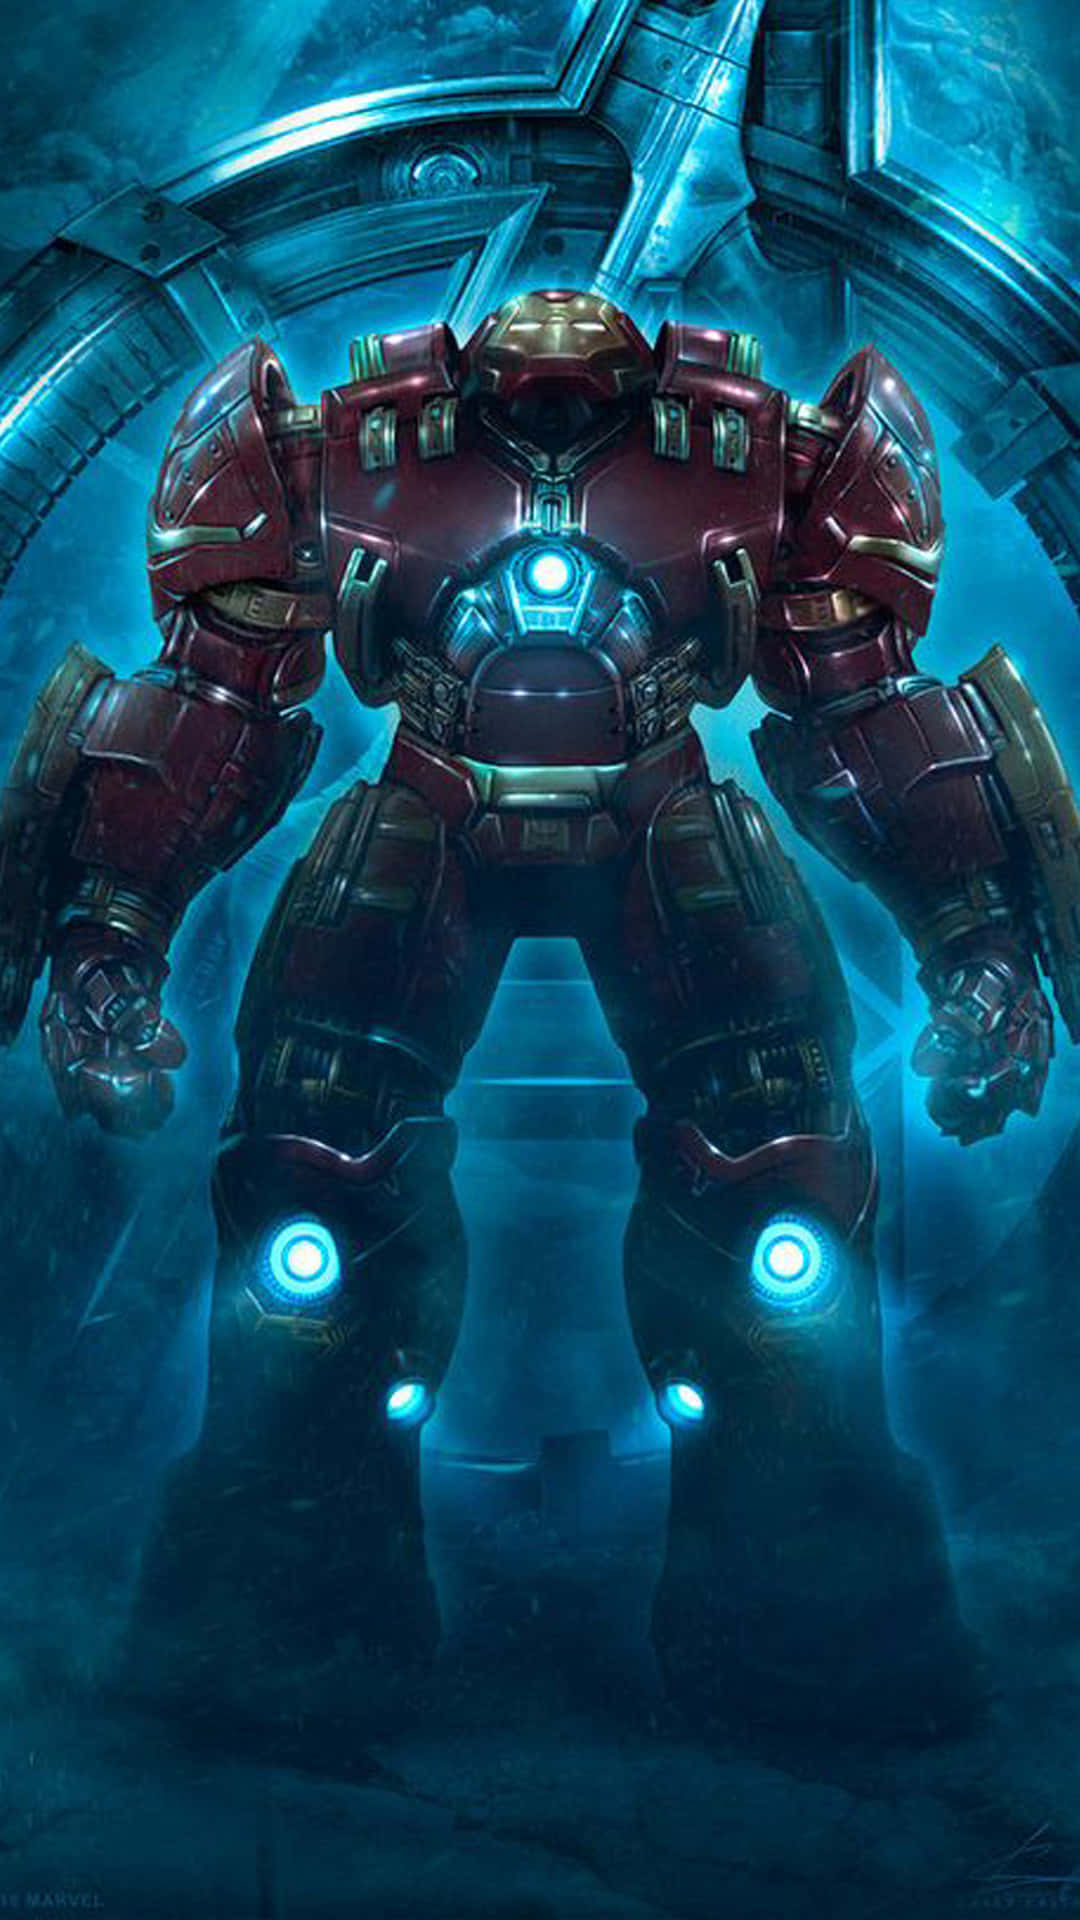 Enjoy a bright, meaningful background with Jarvis Wallpaper